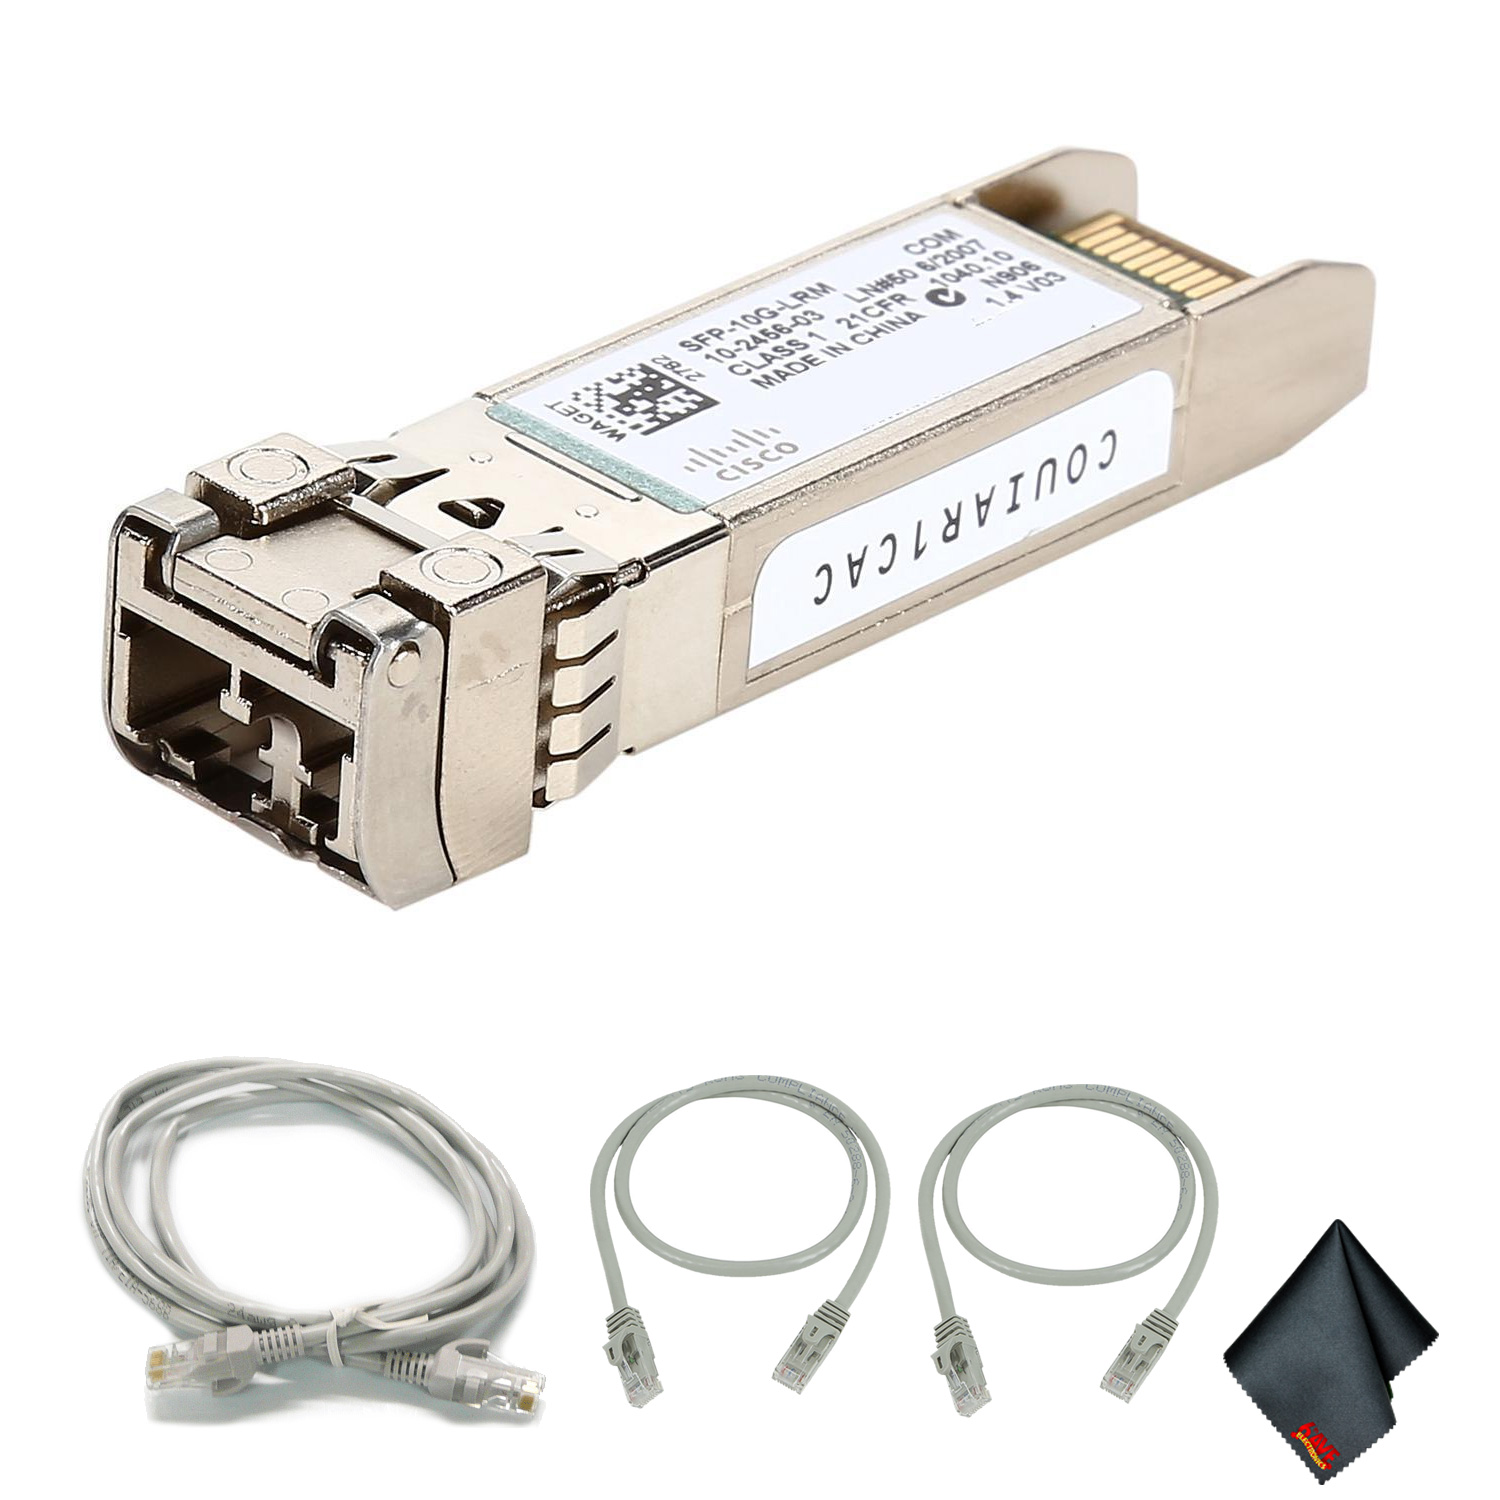 Cisco SFP-10G-LRM 10 Gigabit Interface Converter with Extra Cat5 Cables (1-Pack) - image 2 of 2